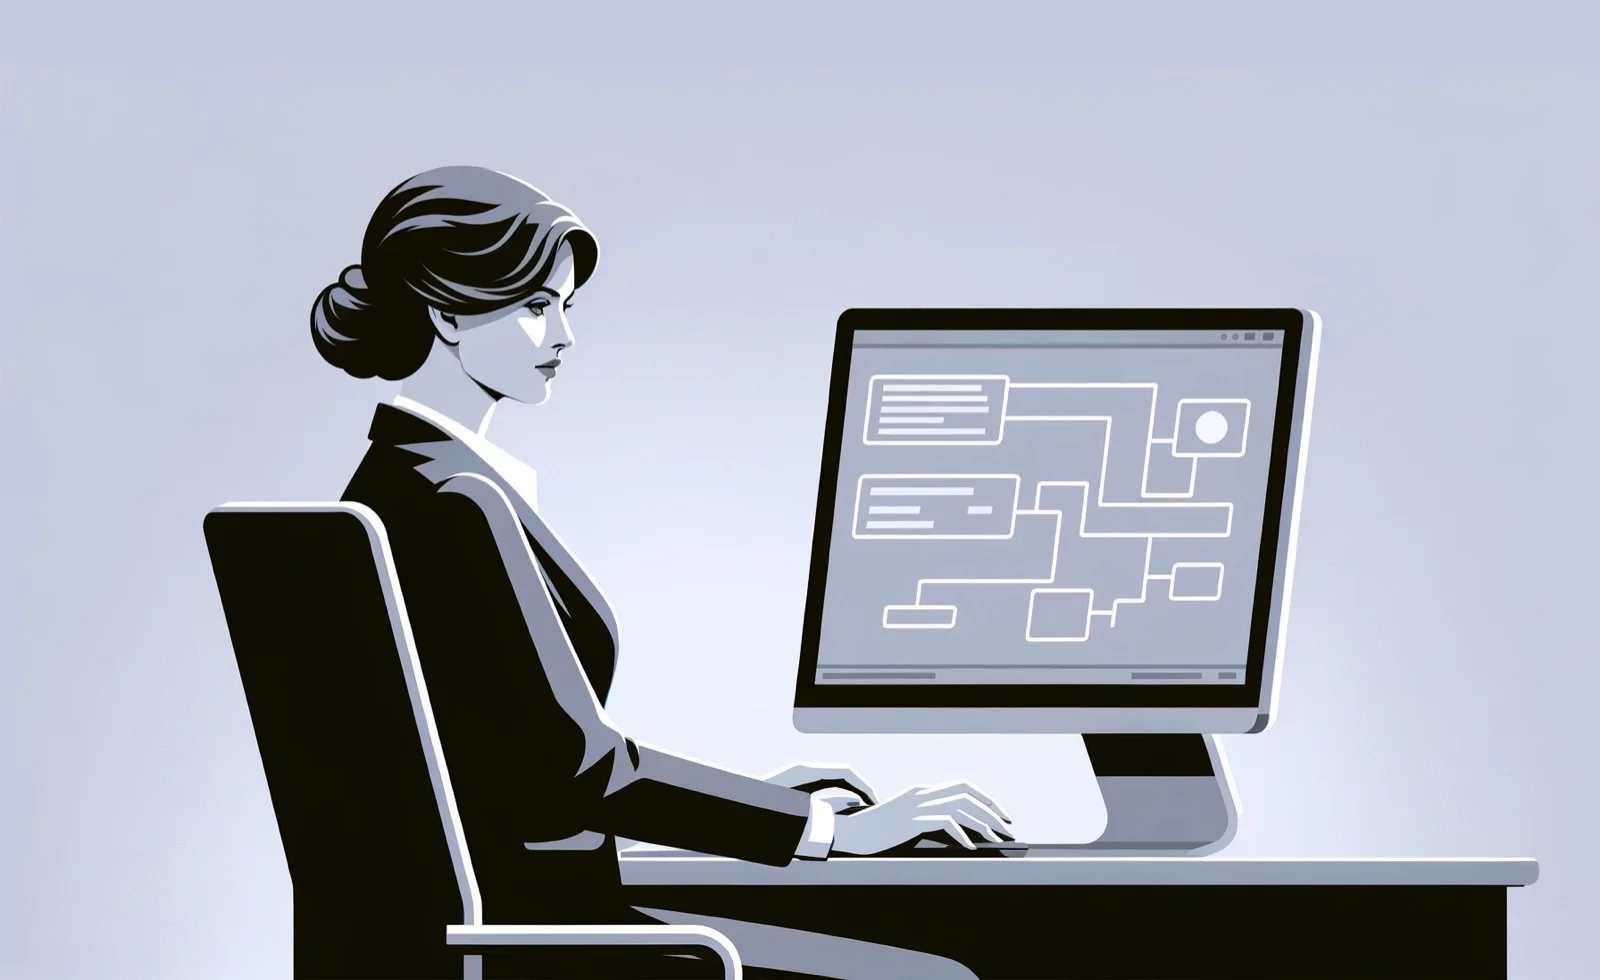 Corporate woman working on a computer with a focus on business workflows